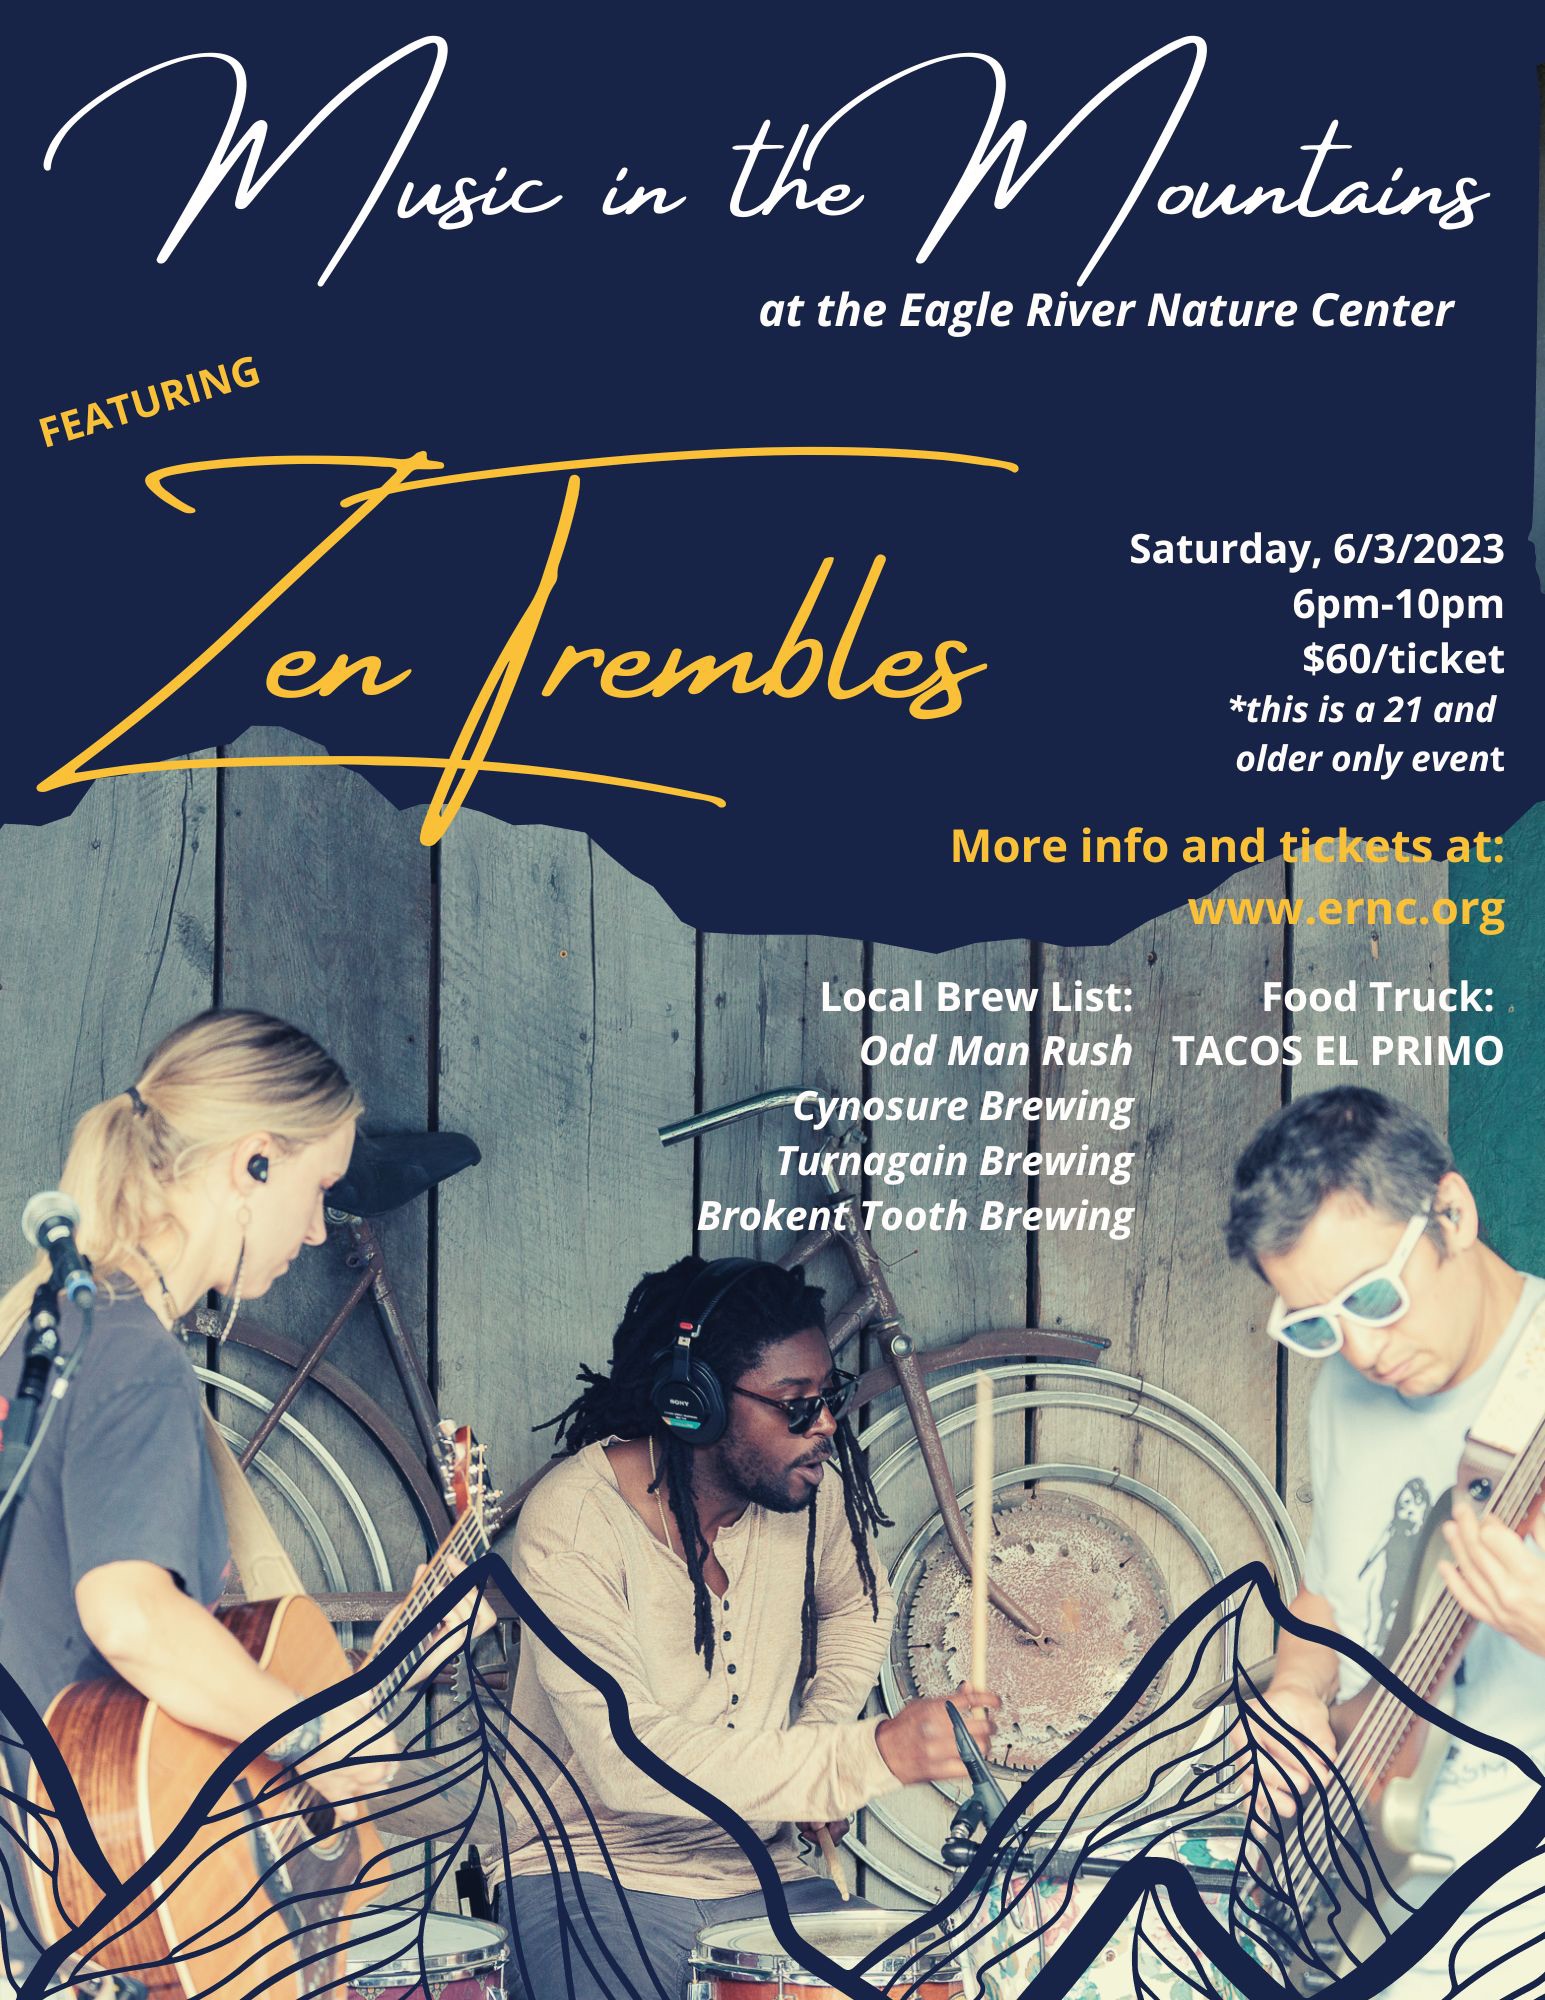 Music in the Mountains at Eagle River Nature Center